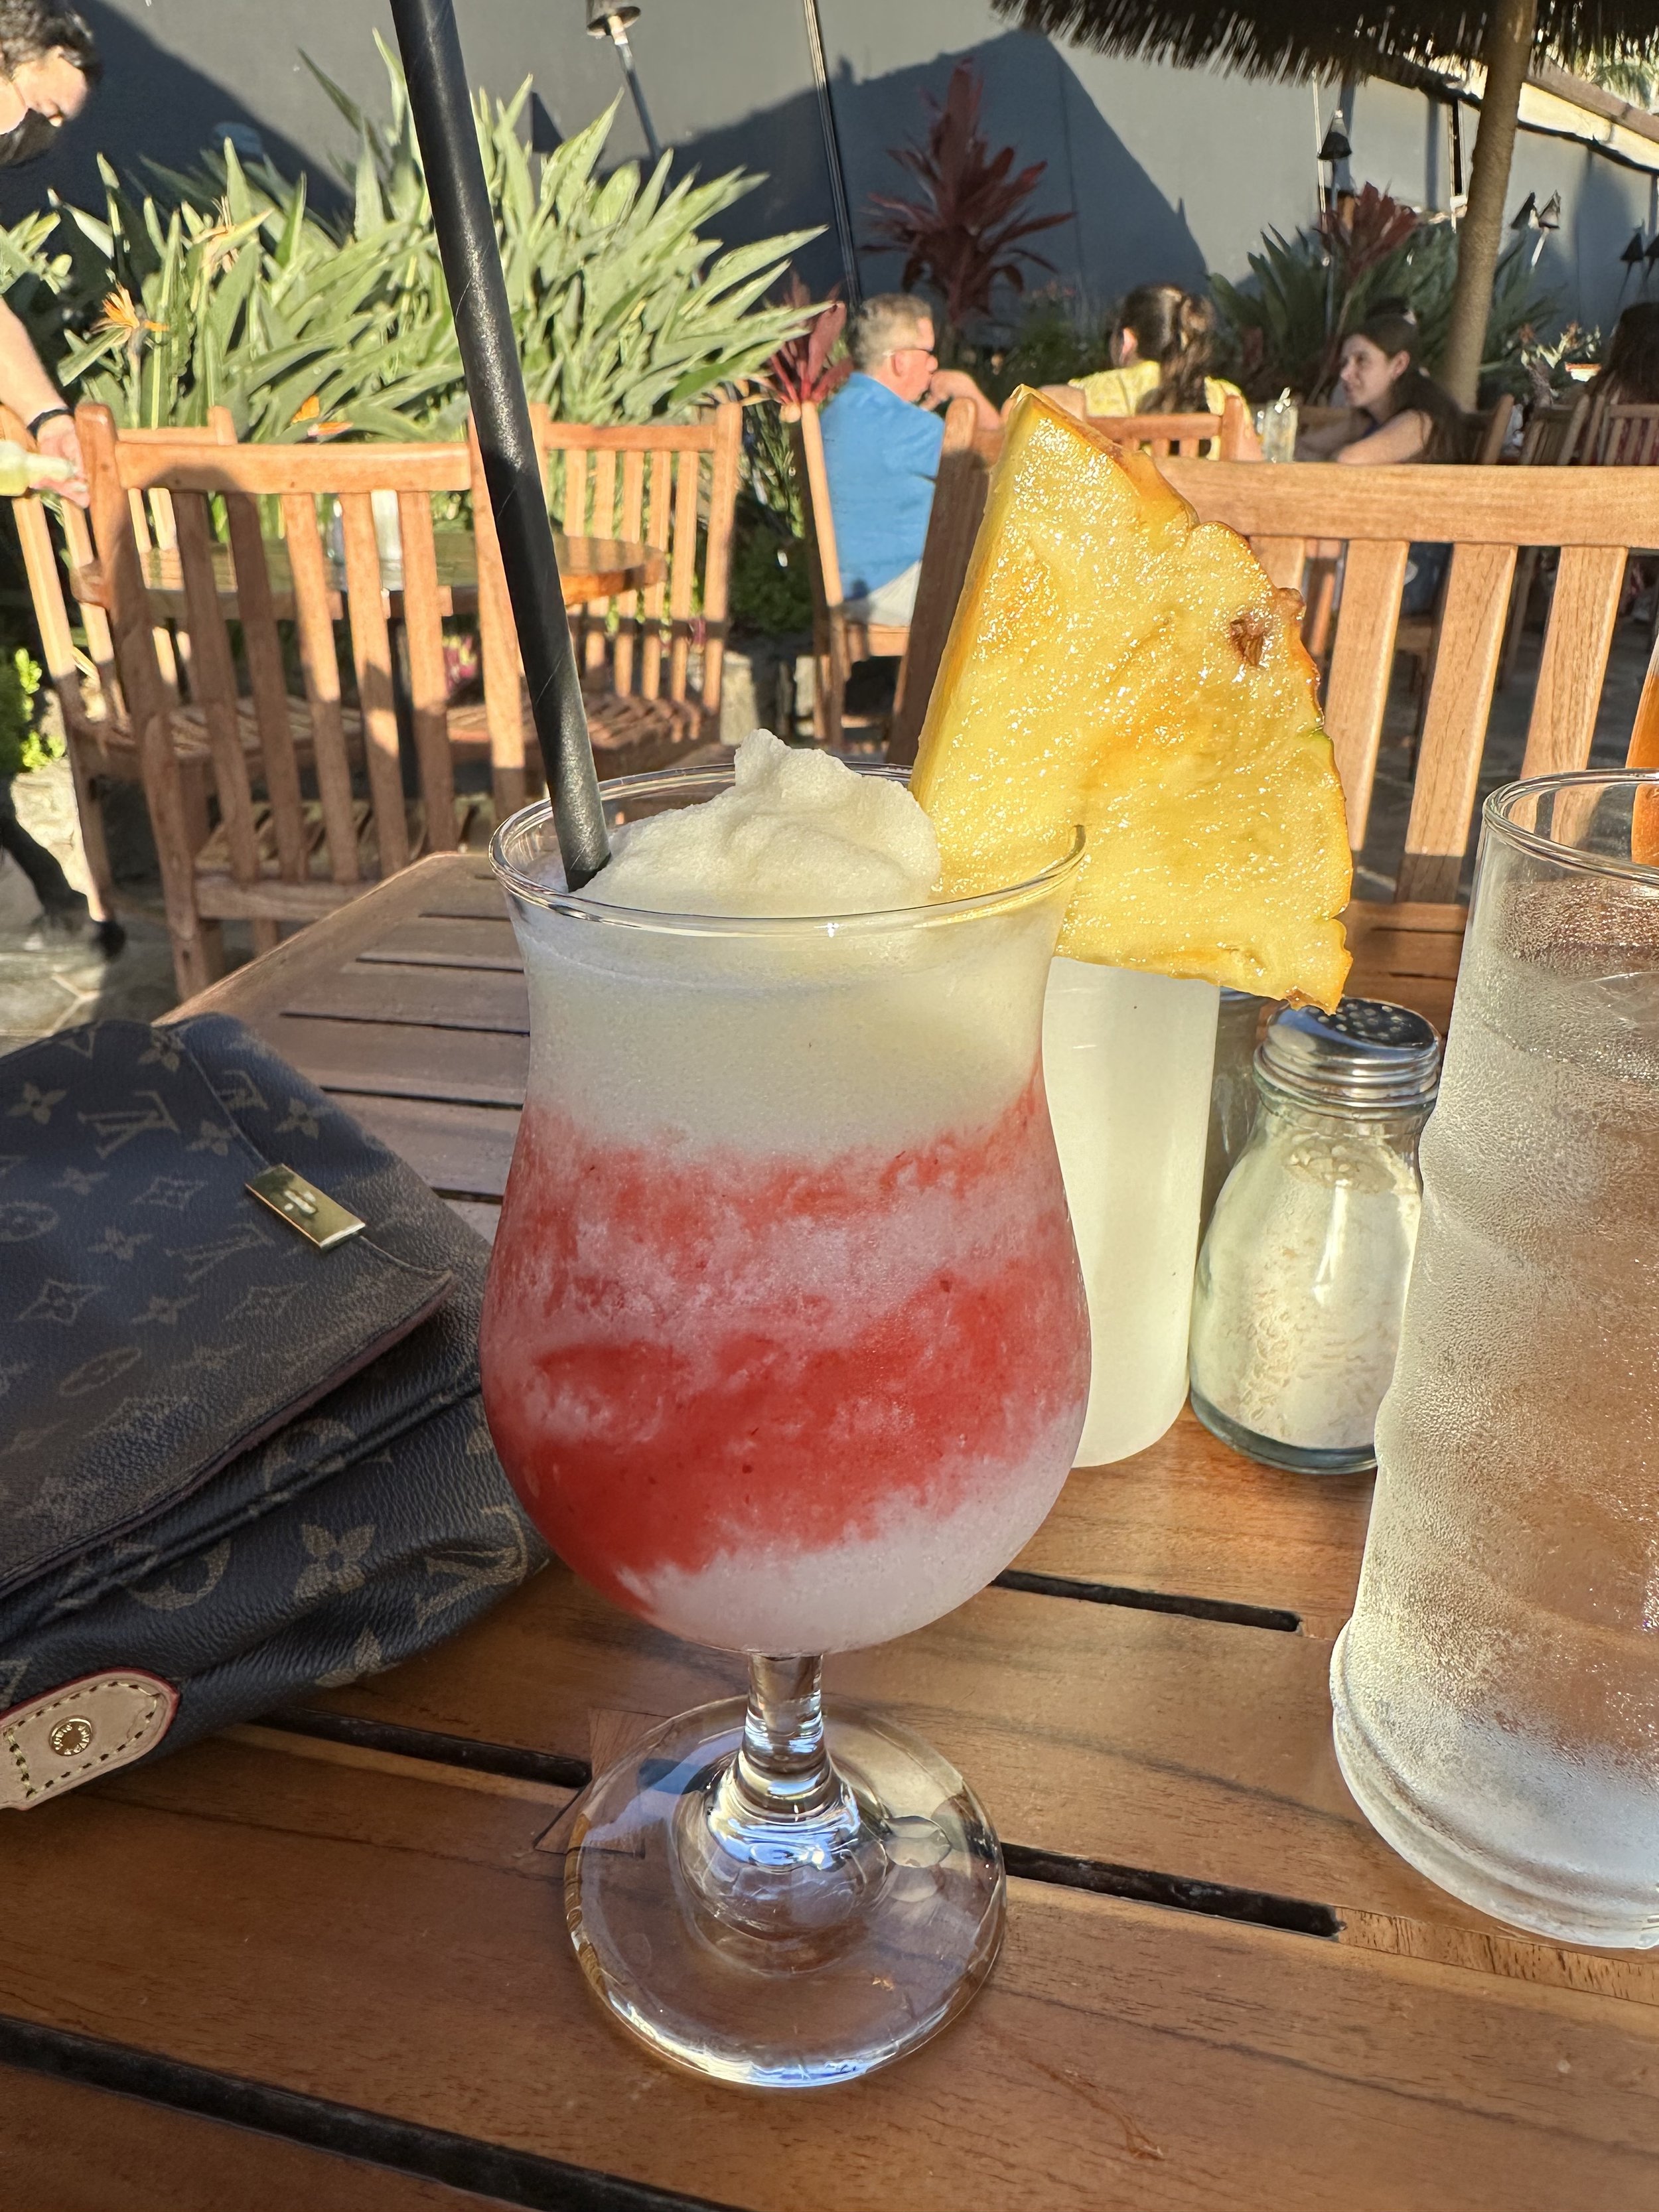 Every beach trip starts with a fruity cocktail